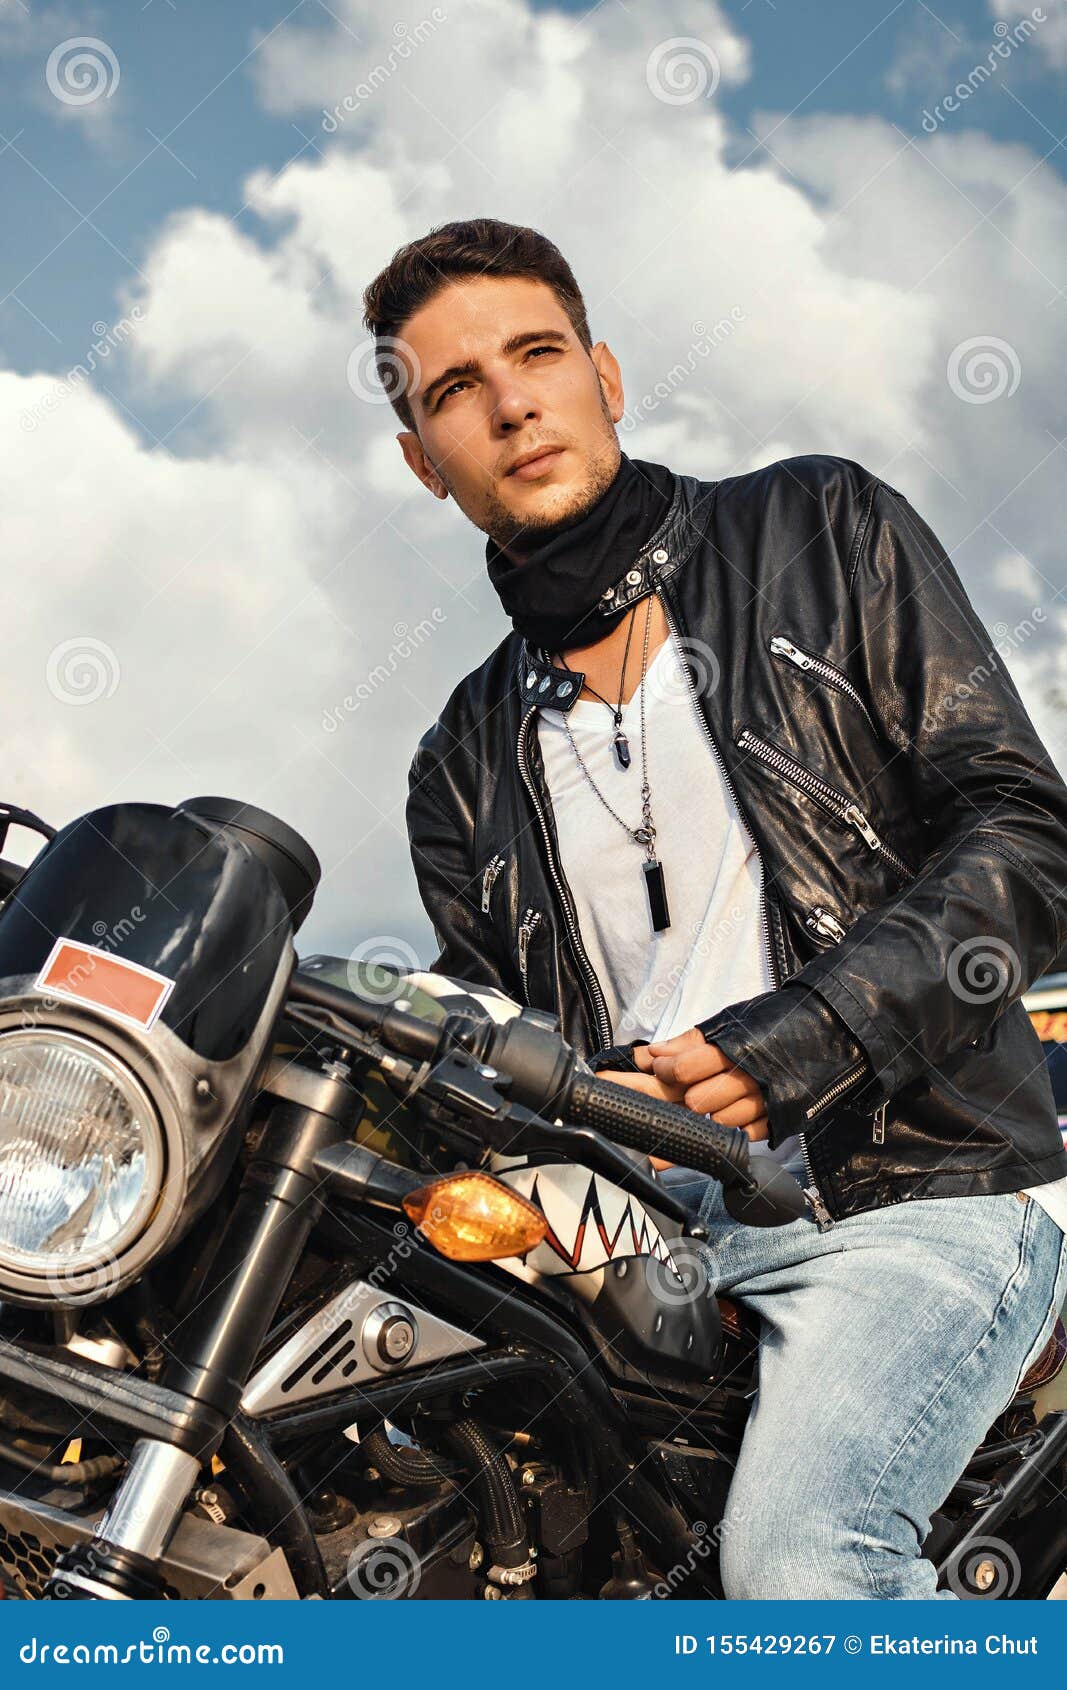 Guy on a Motorbike on the Beach Stock Image - Image of motor, beach ...